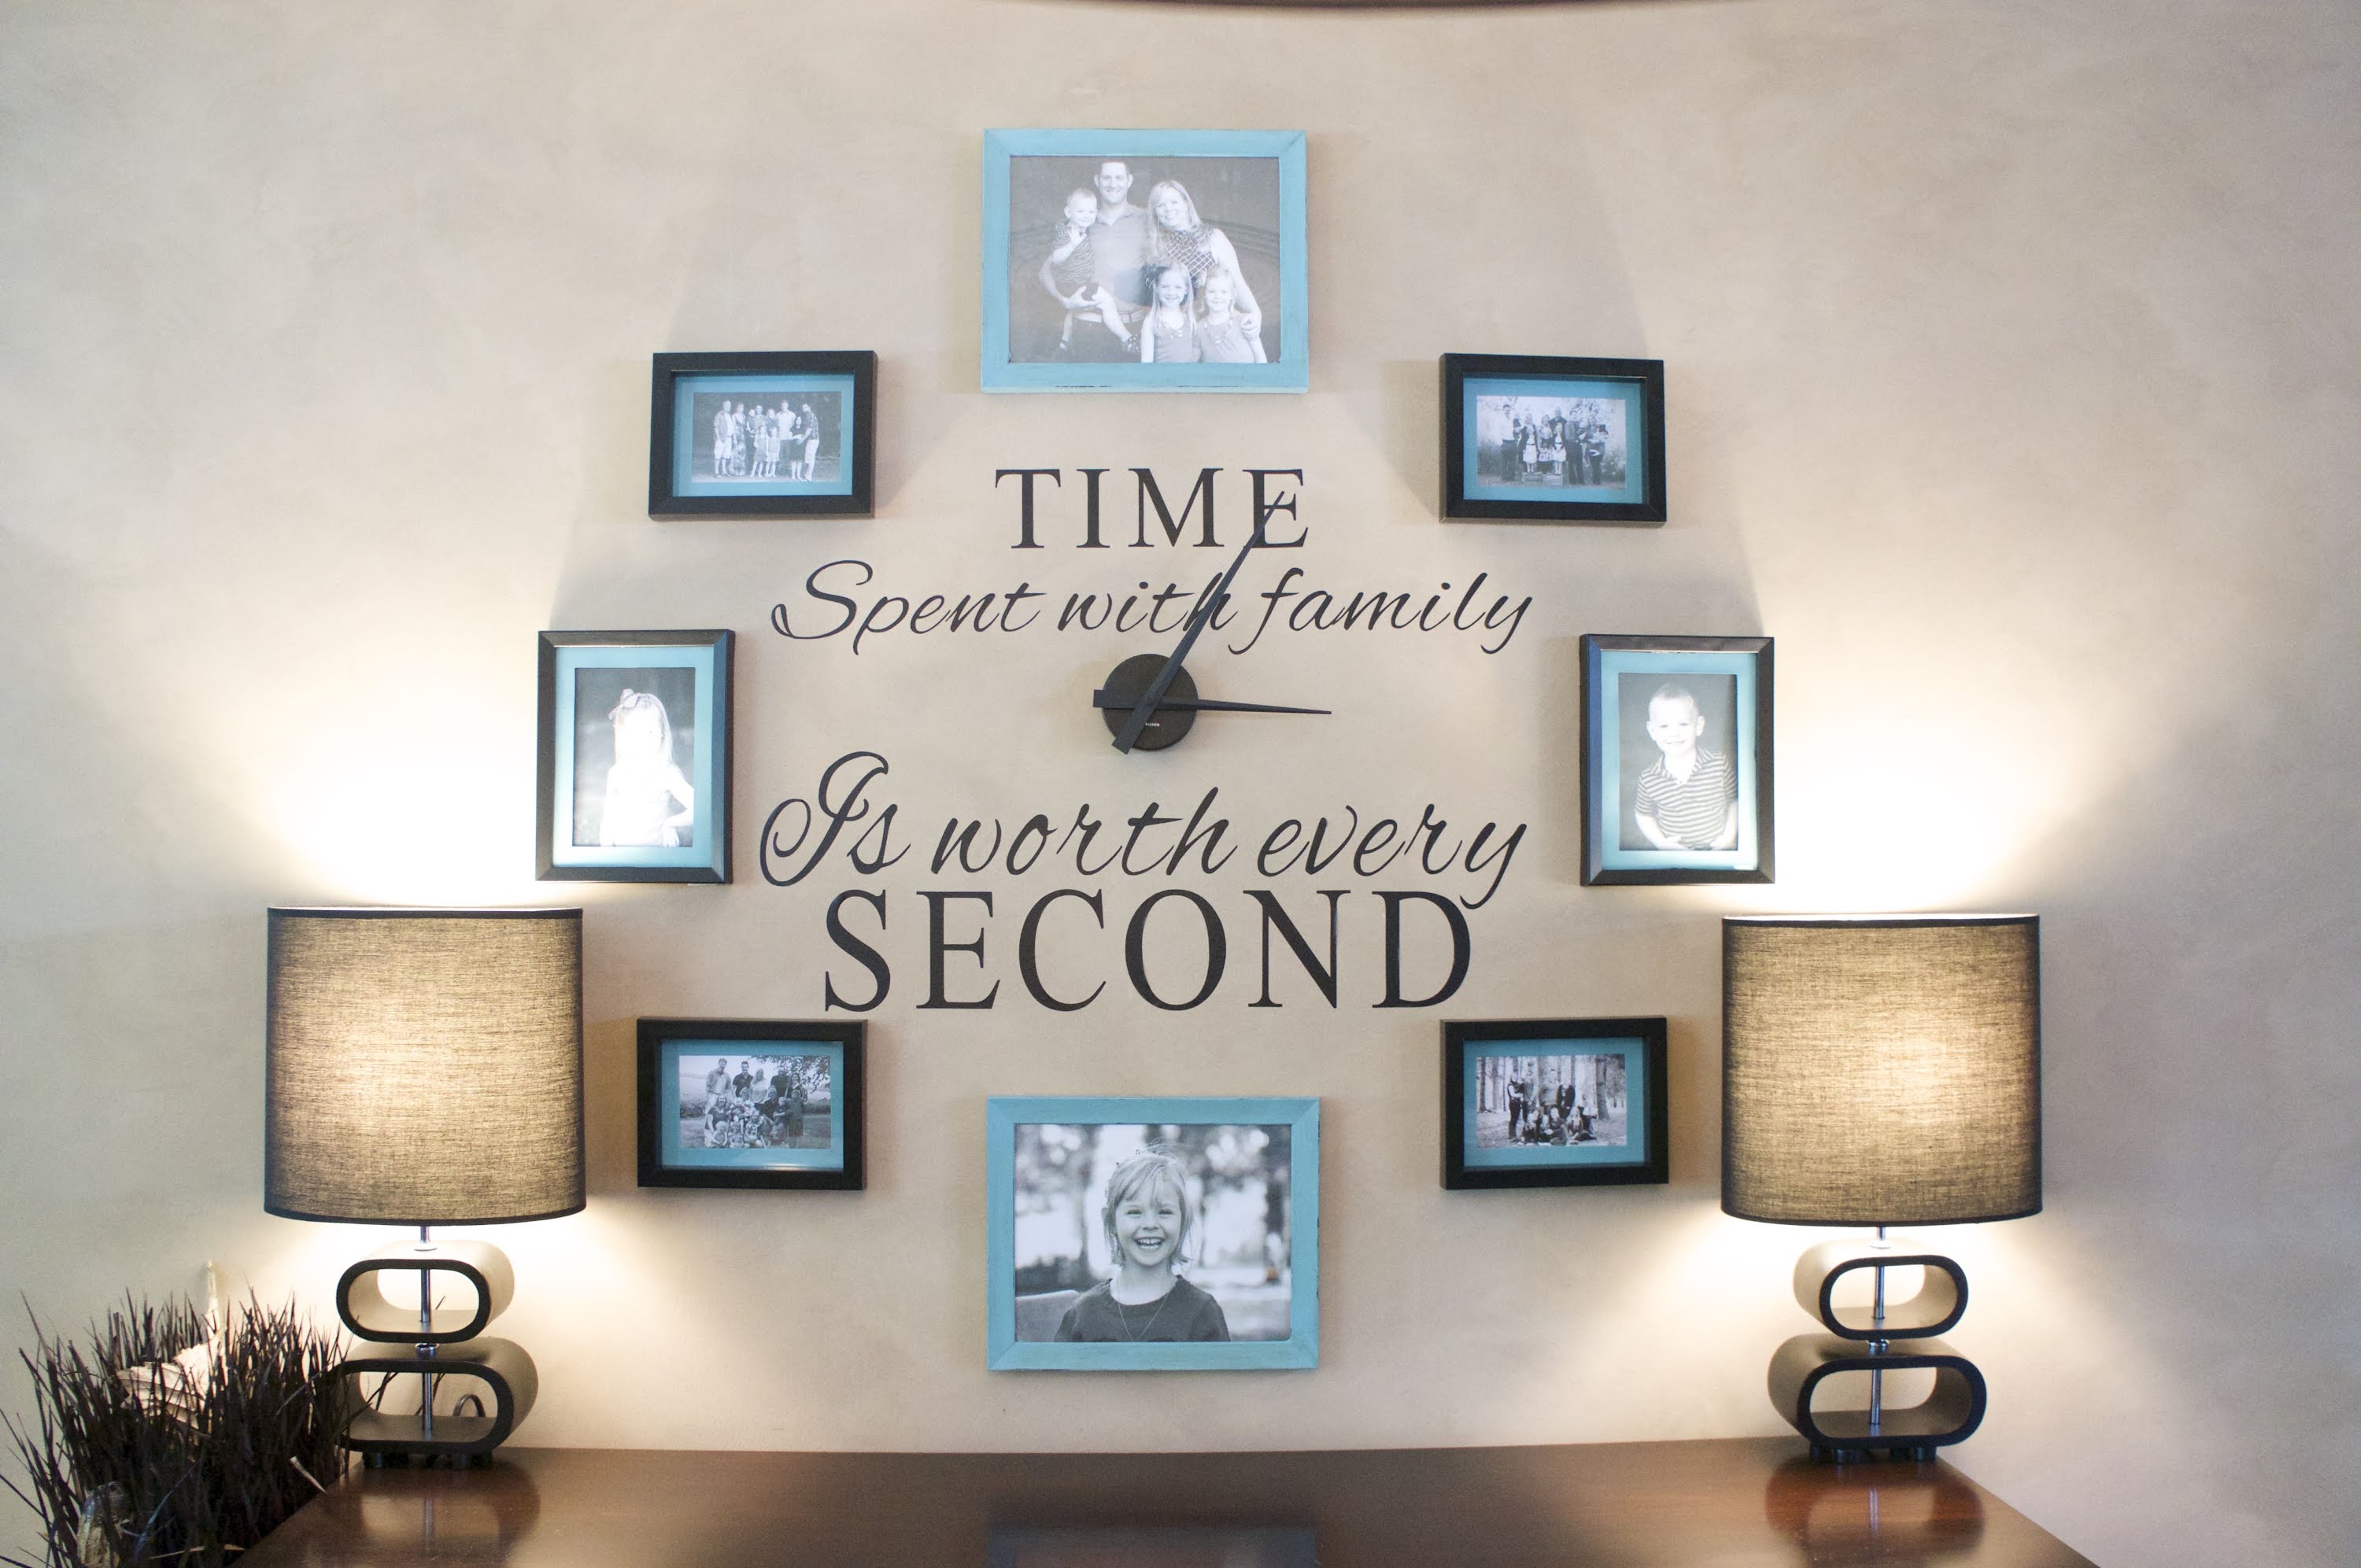 New Picture Frame Wall Clock D I Y How To Make A Family - HD Wallpaper 